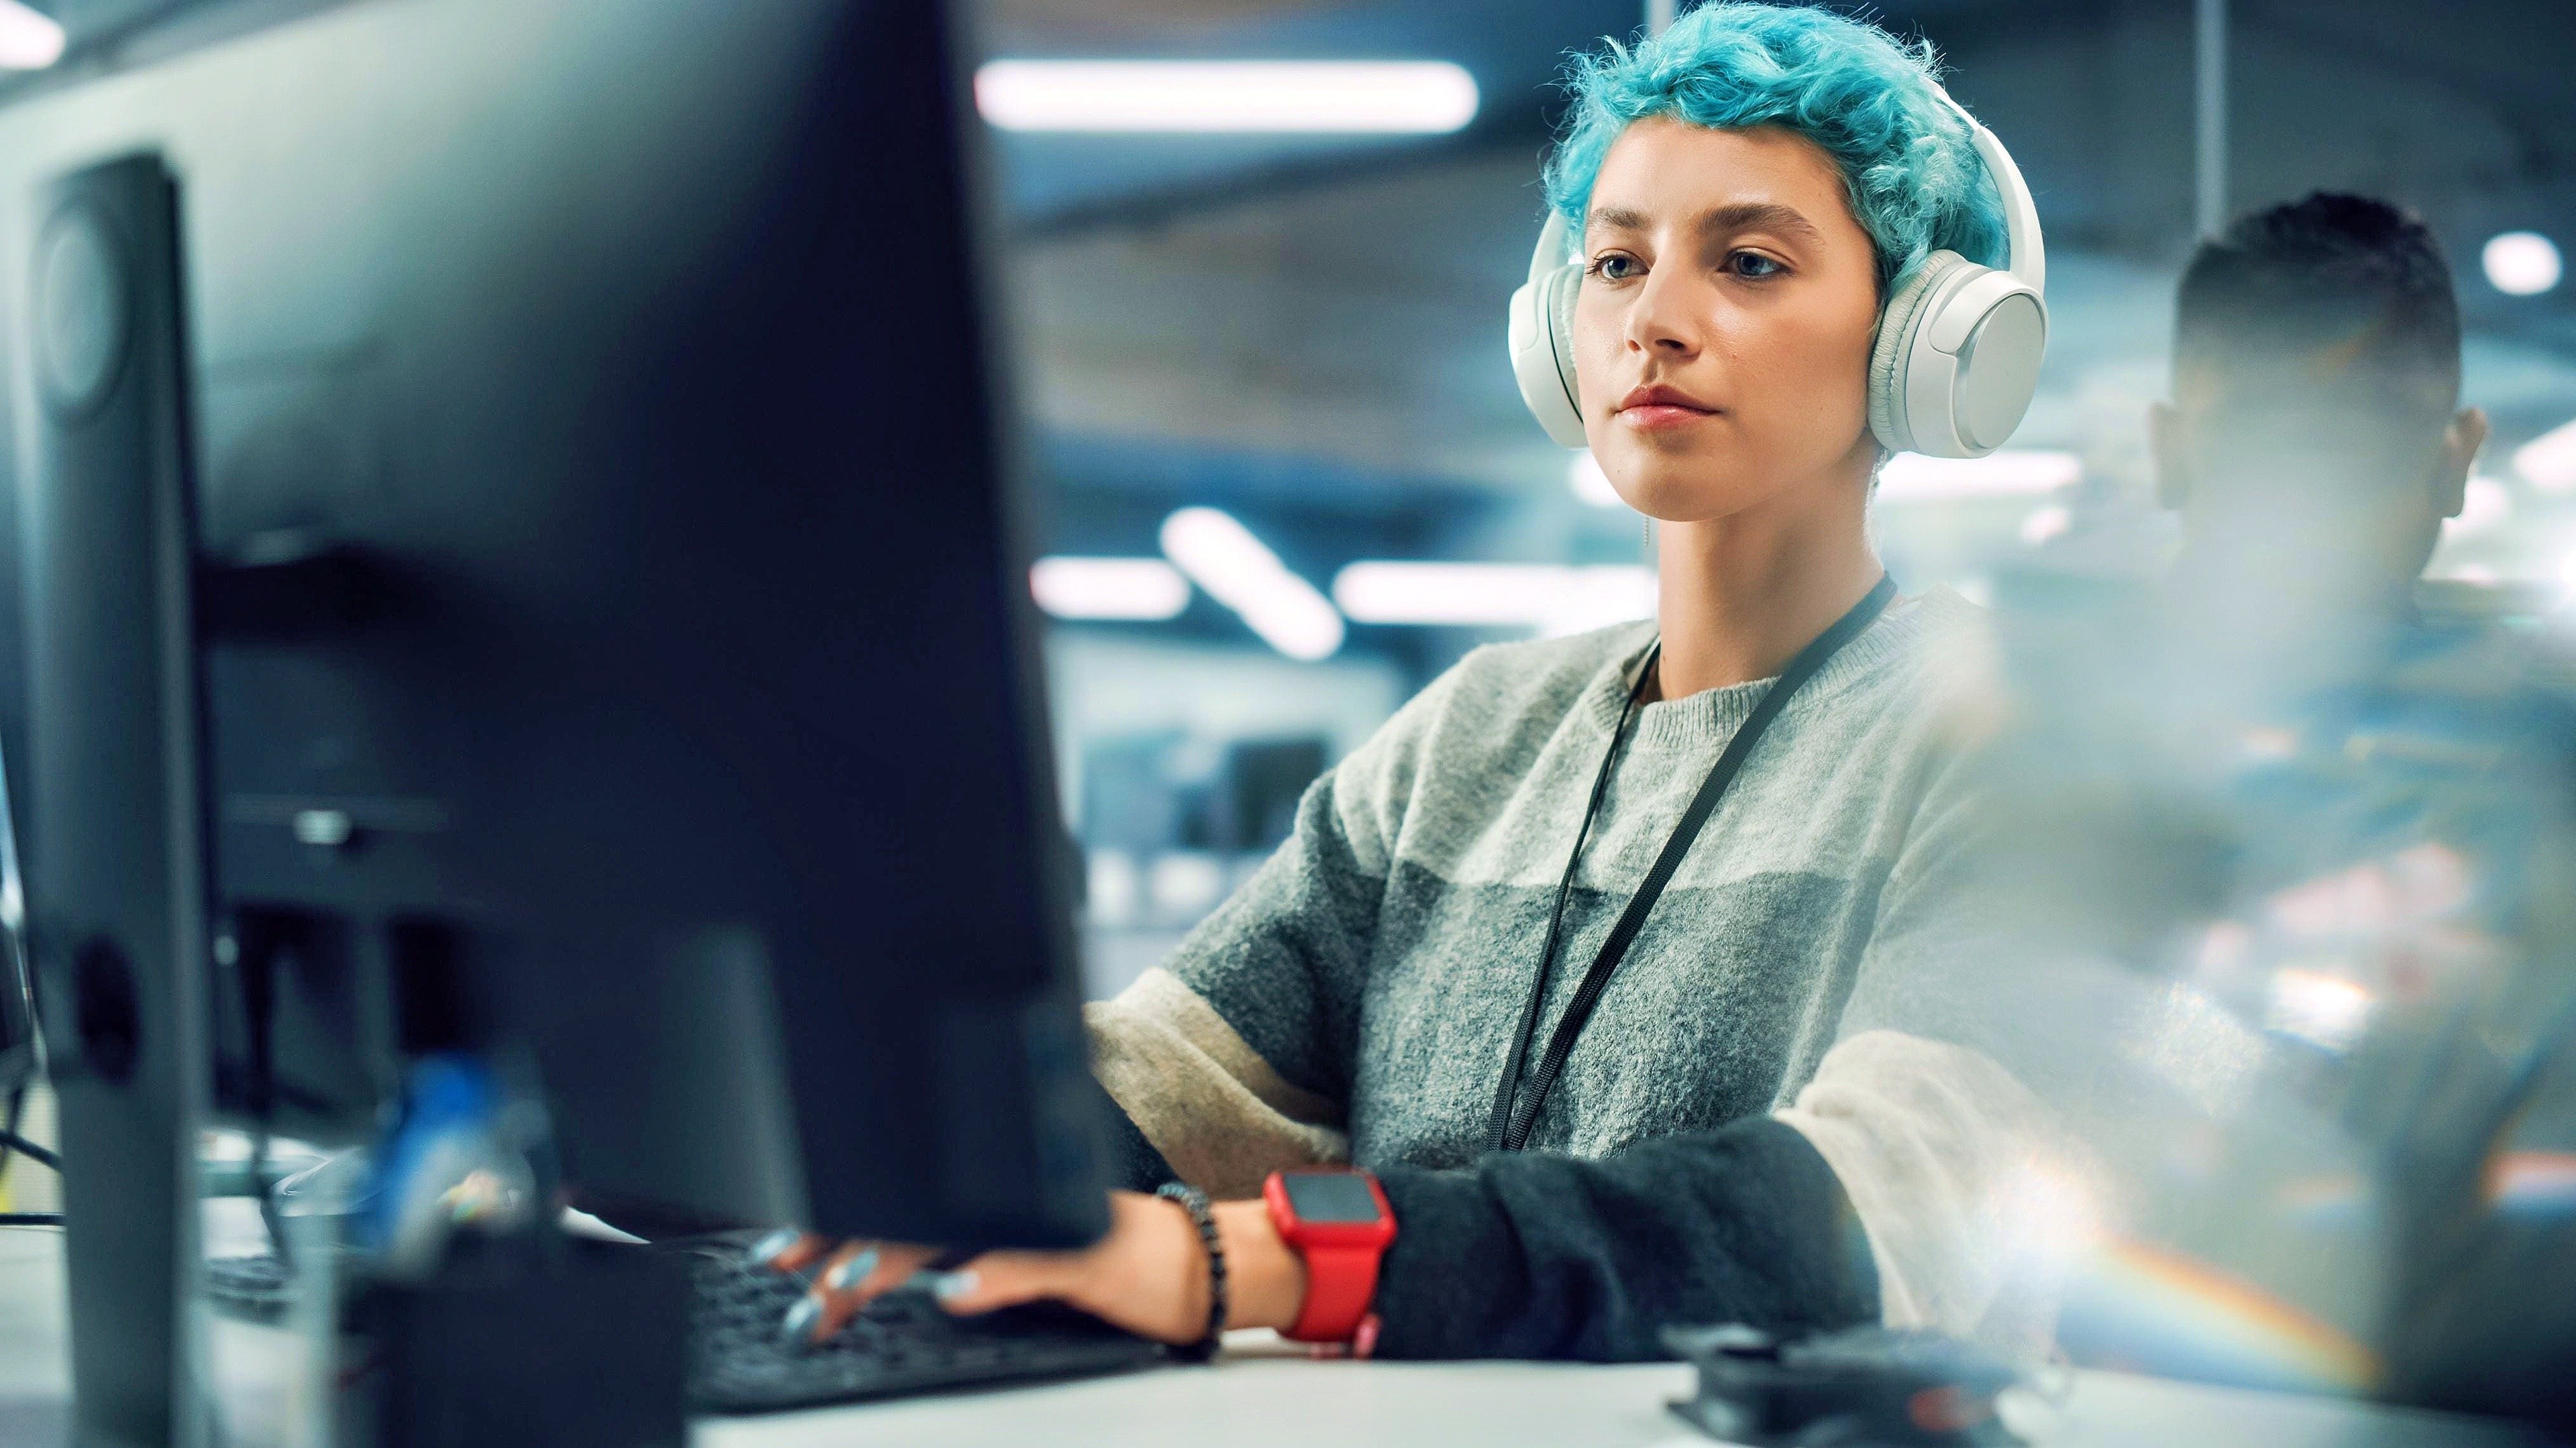 A young woman wearing headphones and working on a computer in an office, representing the cloud application development and deployment services offered by Fast Fixx to build and deploy cloud-native apps quickly and efficiently